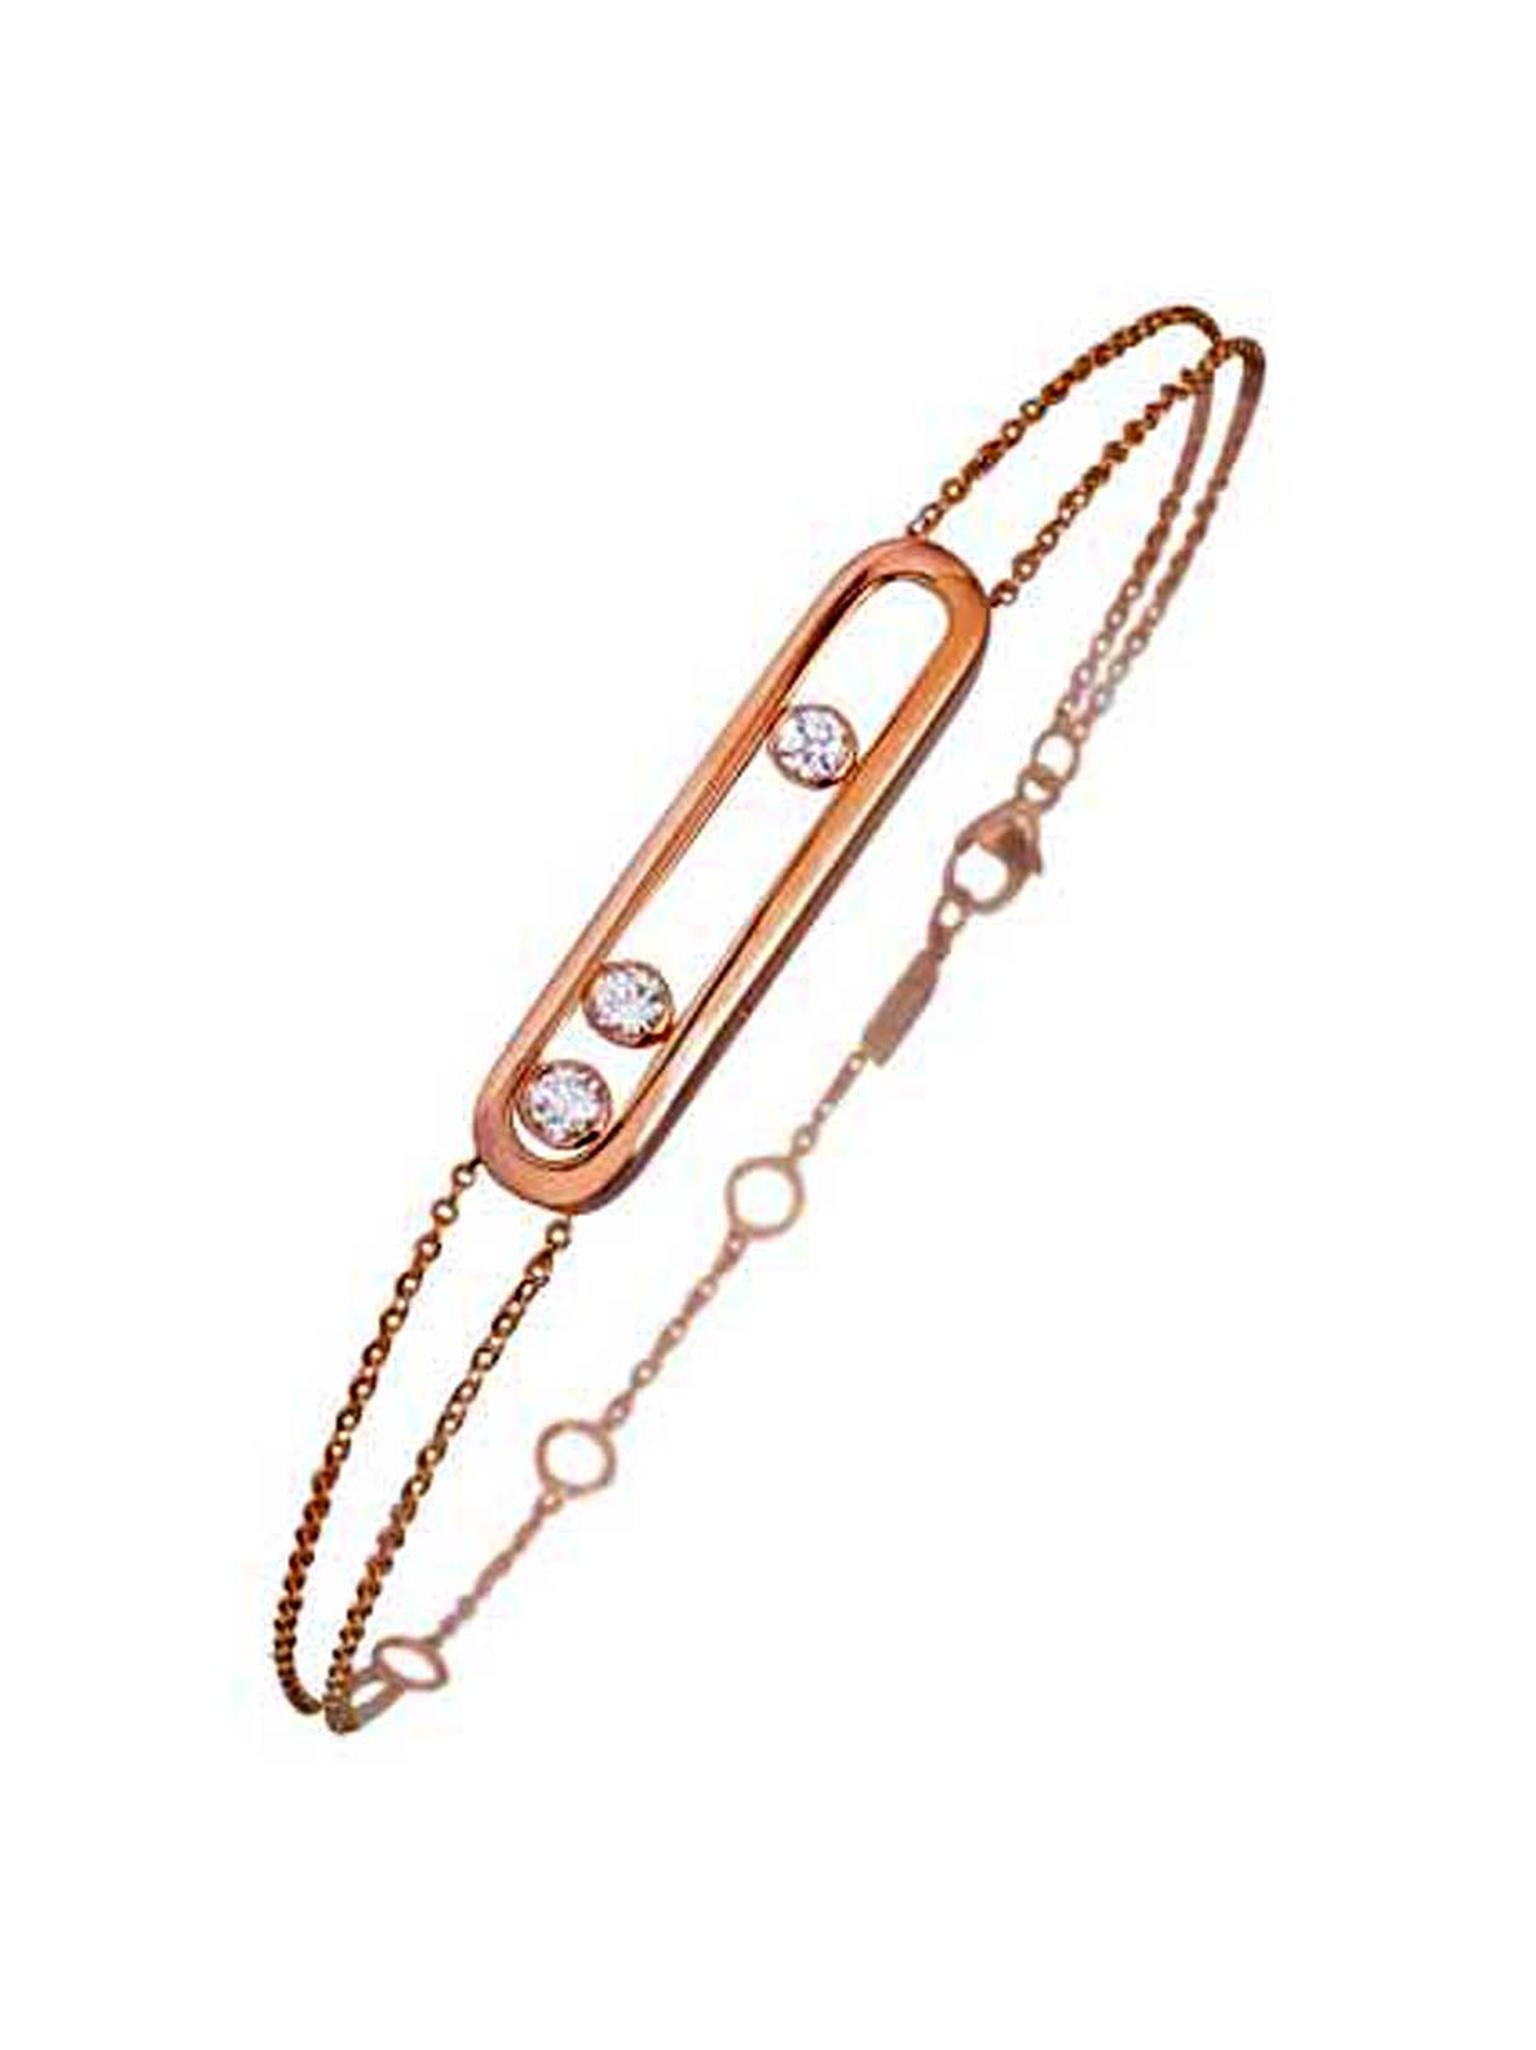 Messika Move bracelet in rose gold with three brilliant-cut diamonds that slide back and forth with the movement of the wearer’s wrist.